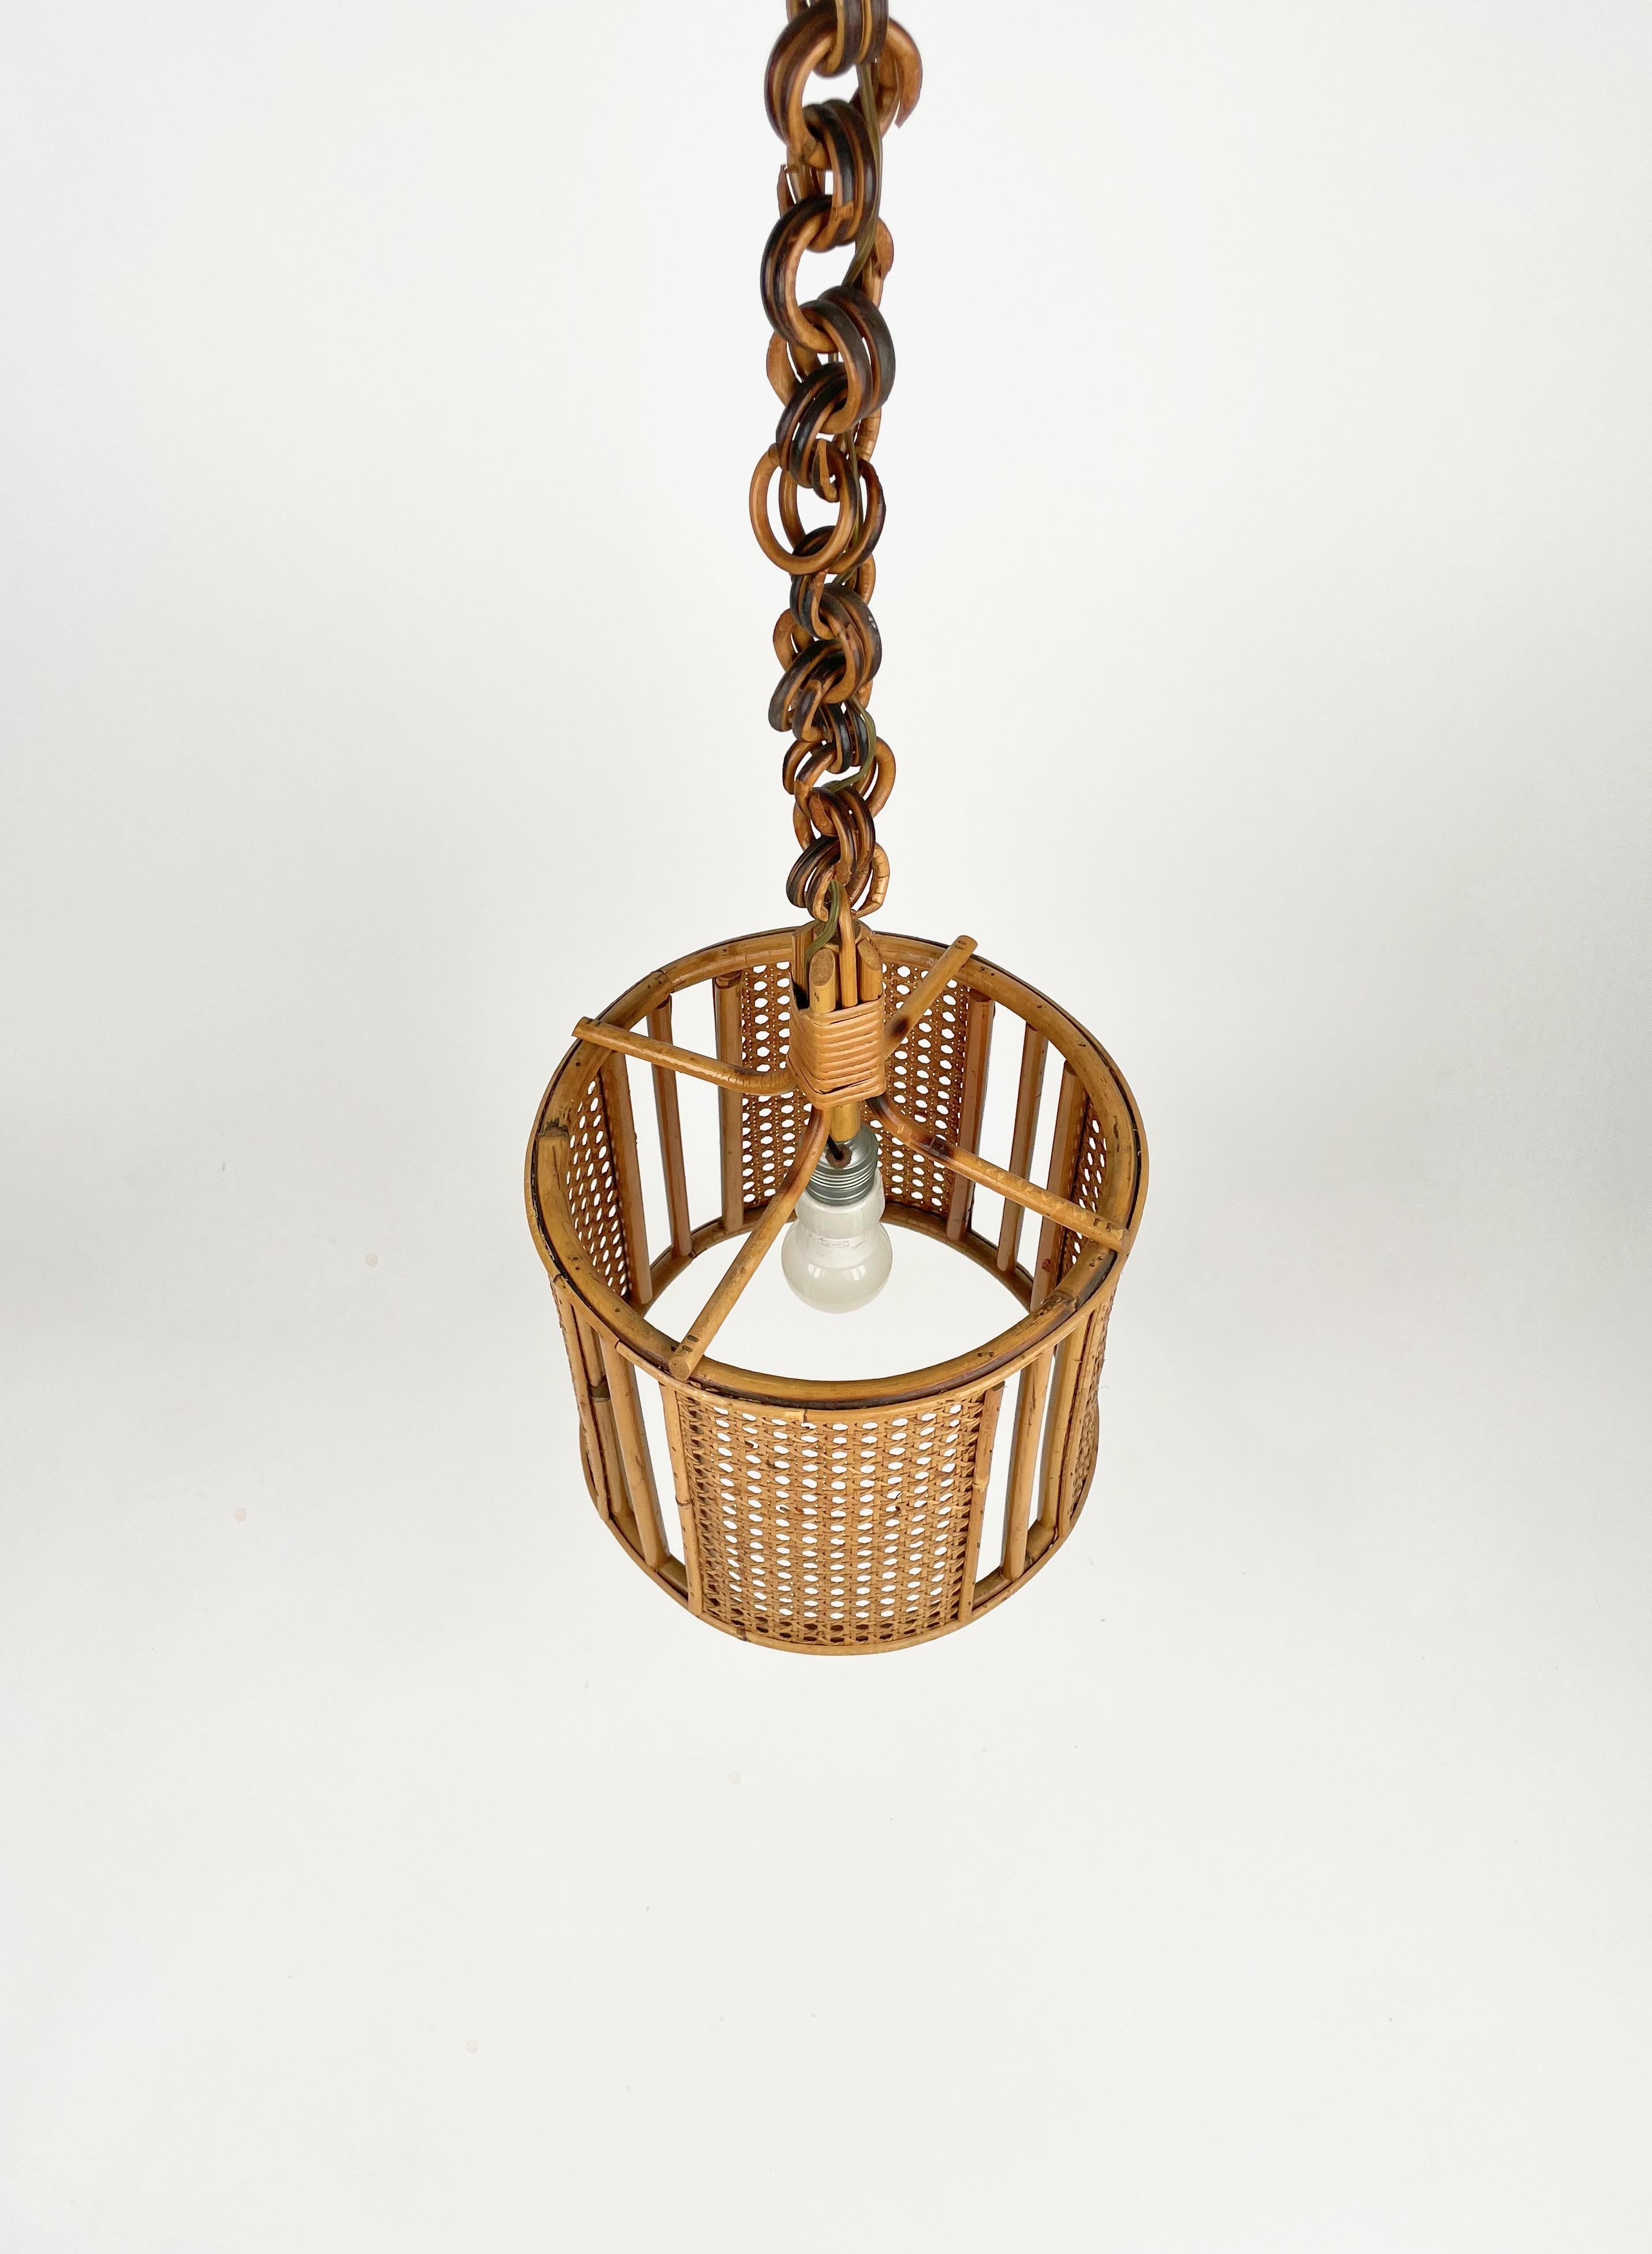 Midcentury French Riviera Rattan and Wicker Pendent, Italy 1960s For Sale 2